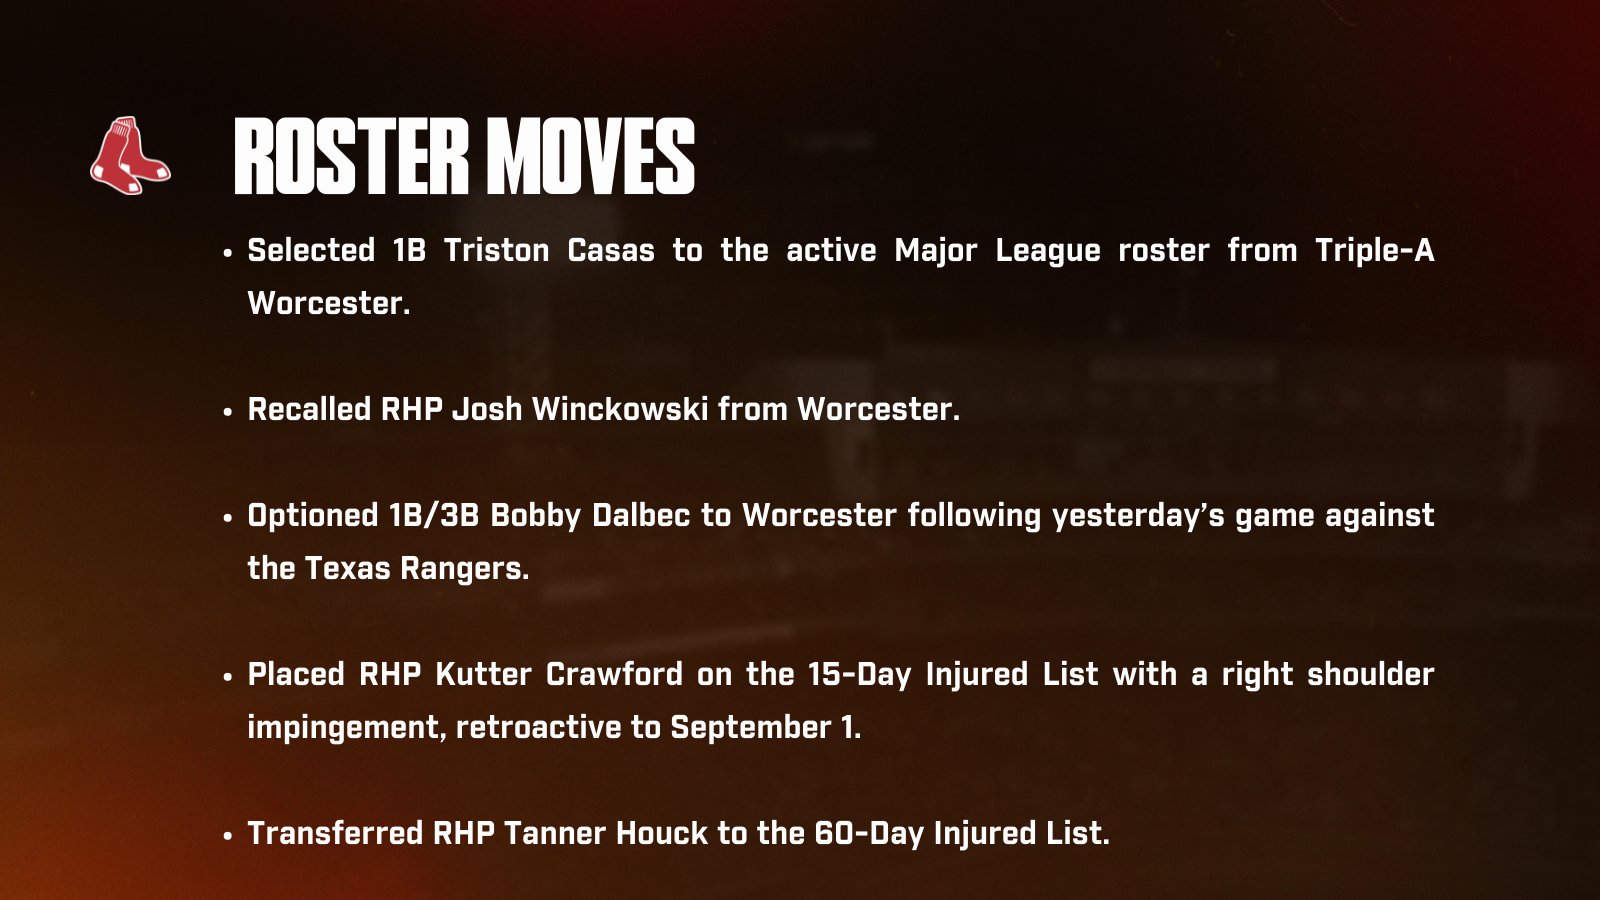 Boston Red Sox - The #RedSox today announced the following roster moves